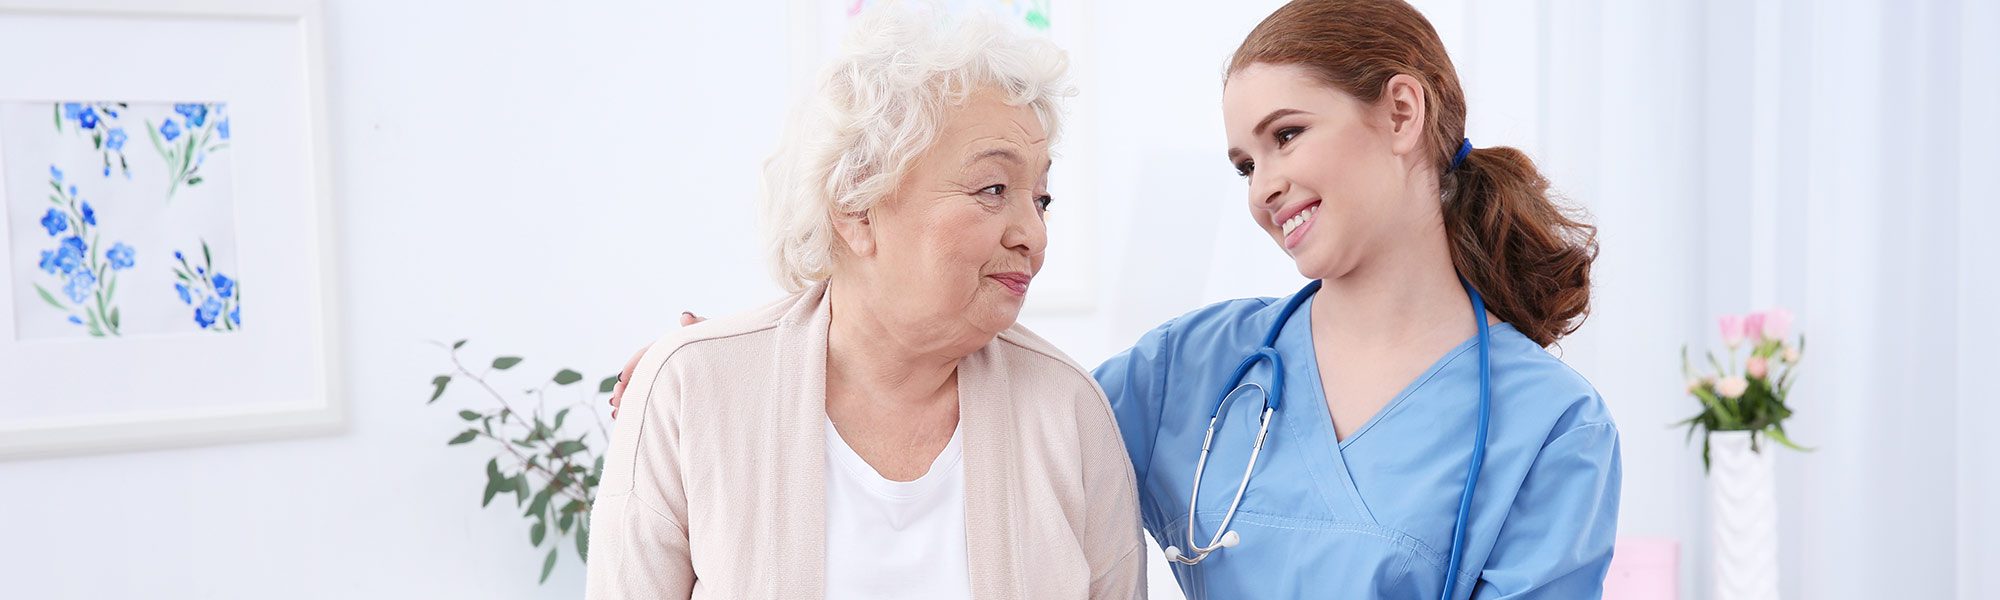 Nurse and an older lady patient smiling at each other